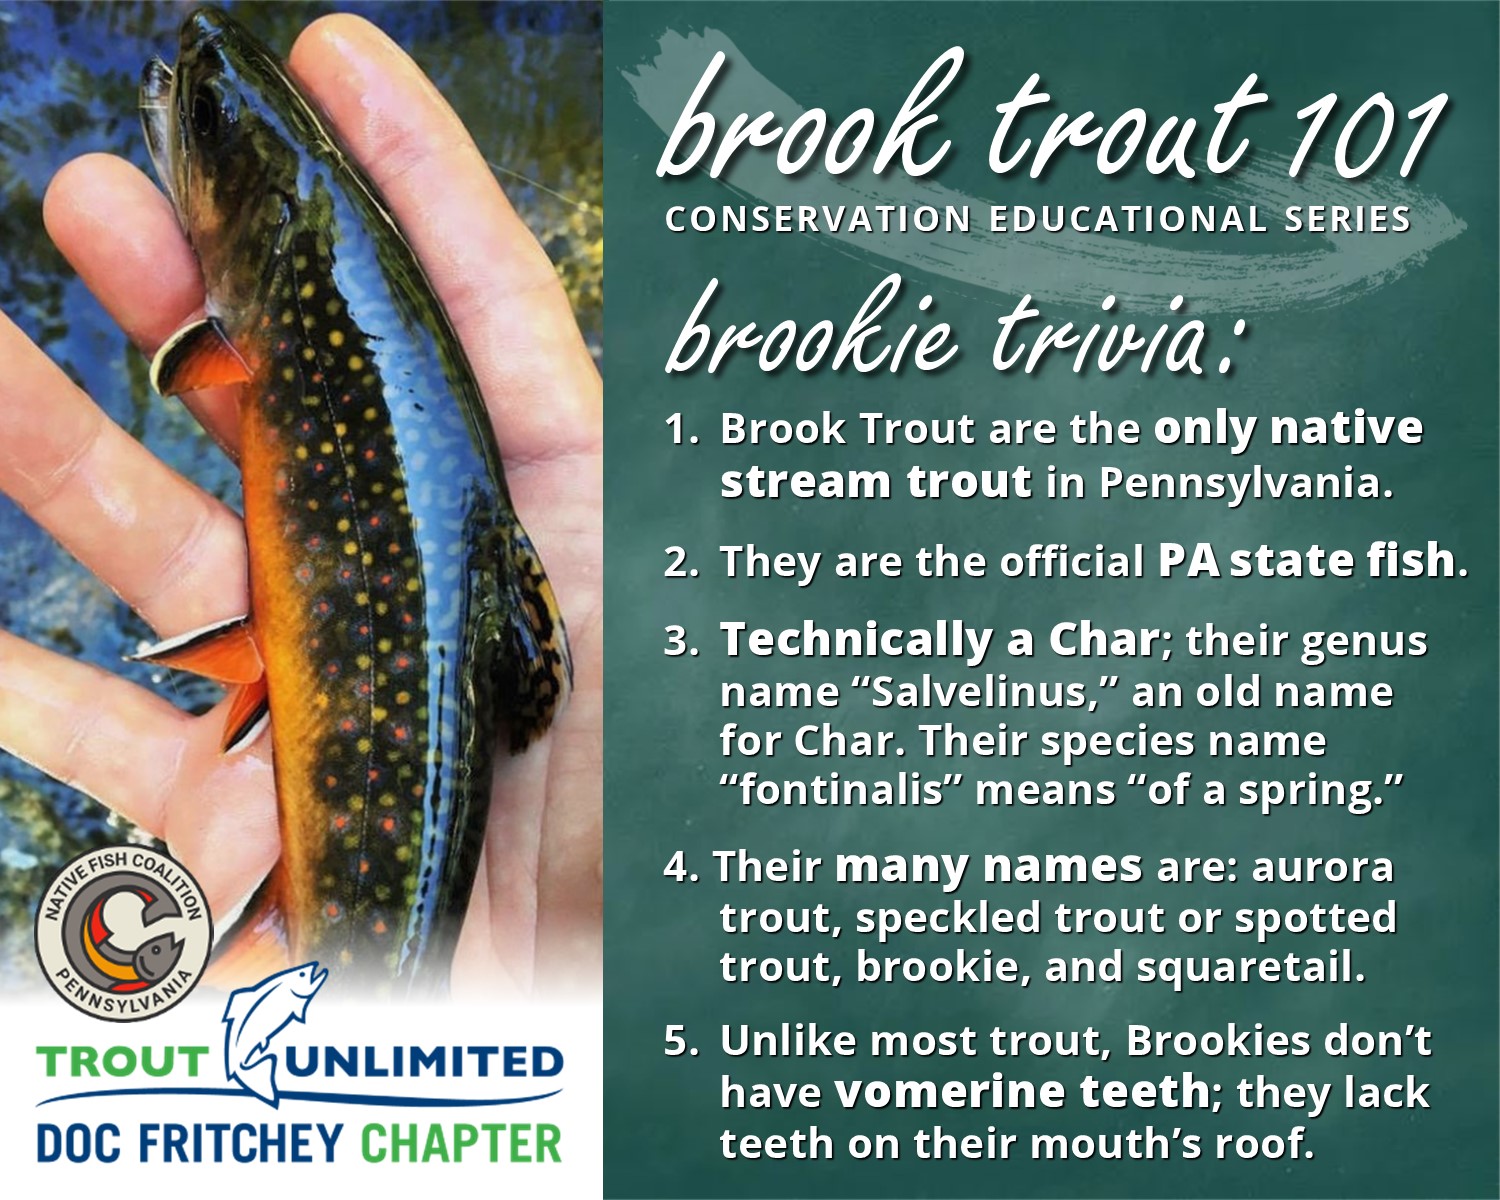 You are currently viewing Brook Trout 101: Brookie Trivia #1